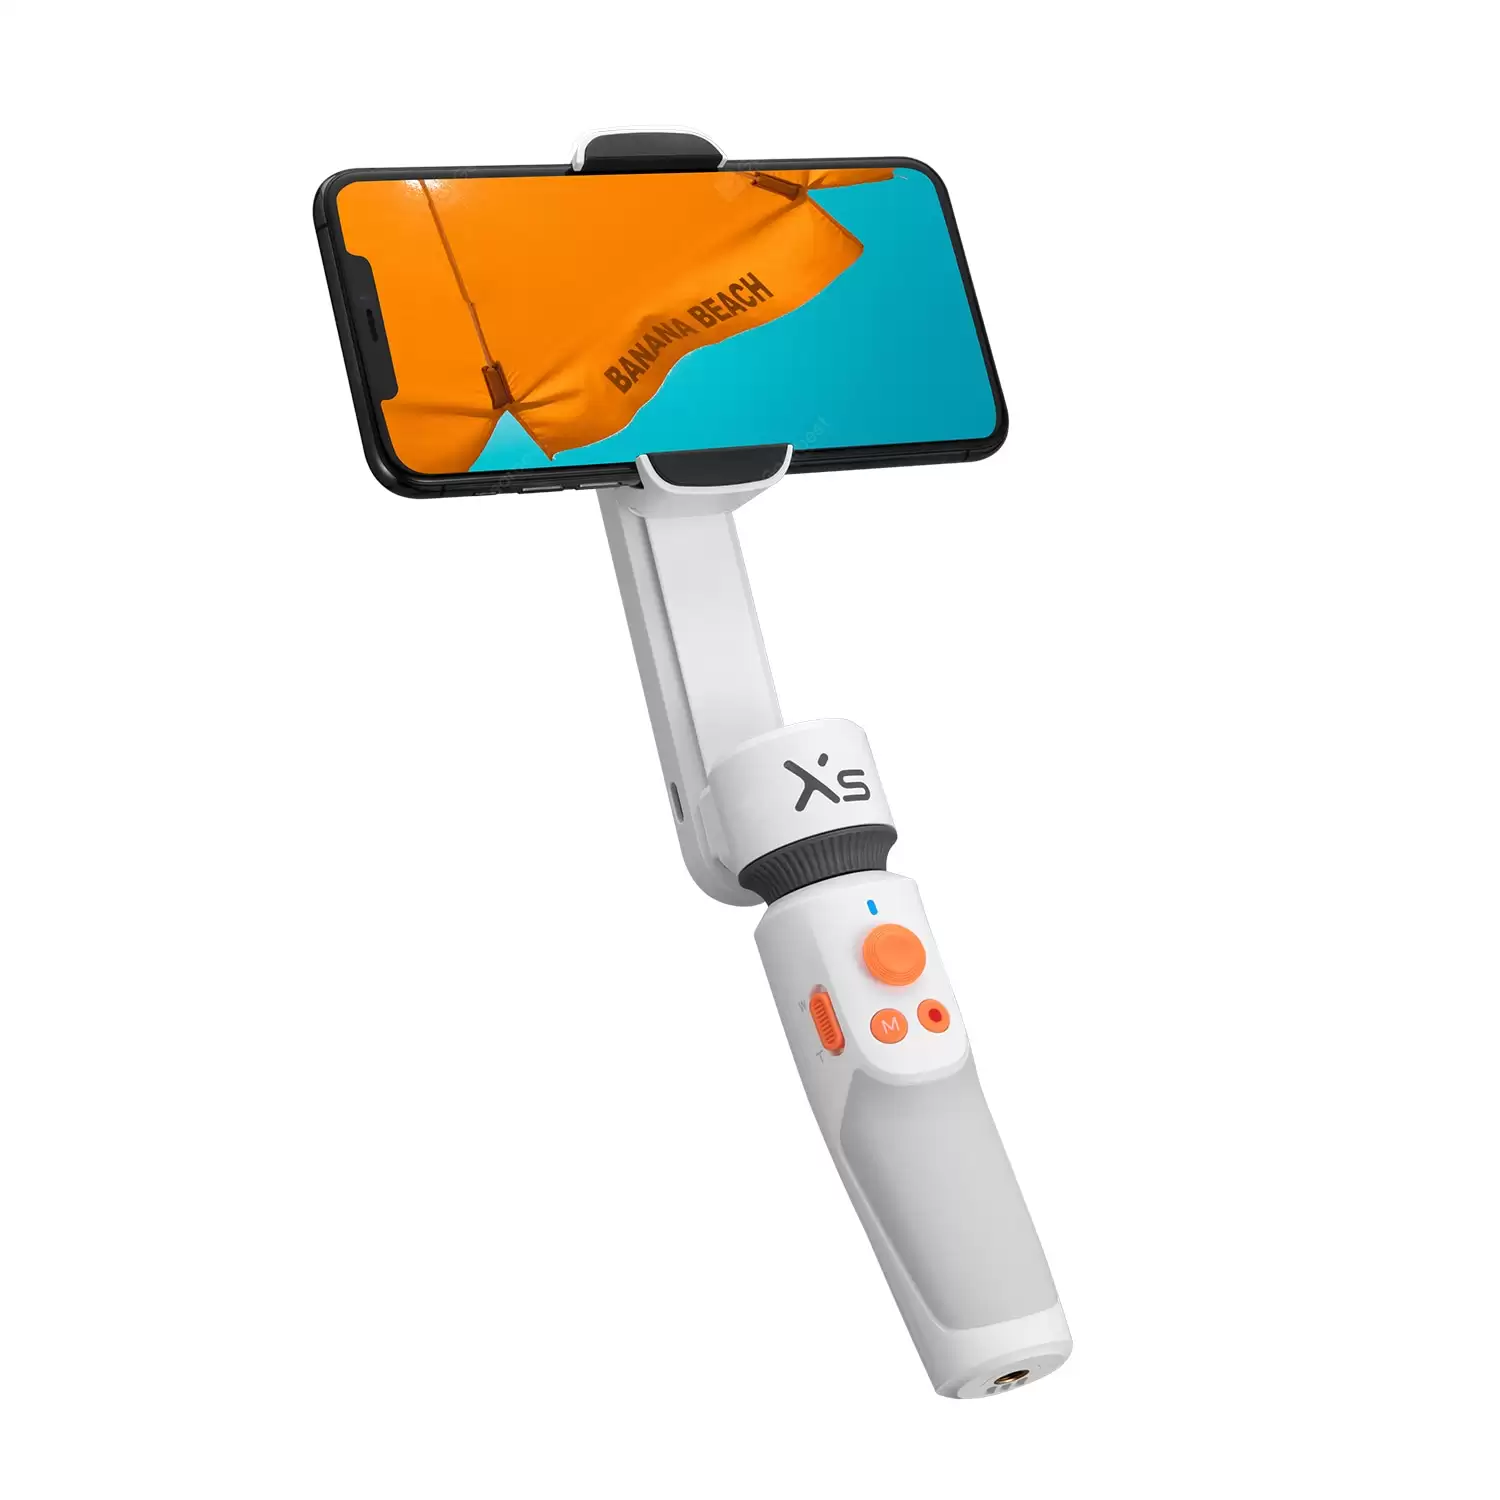 Order In Just $54.99 Zhiyun Official Smooth Xs Phone Gimbals Selfie Stick Handheld Stabilizer Npalo Smartphones For Iphone Huawei Xiaomi Redmi Samsung At Gearbest With This Coupon